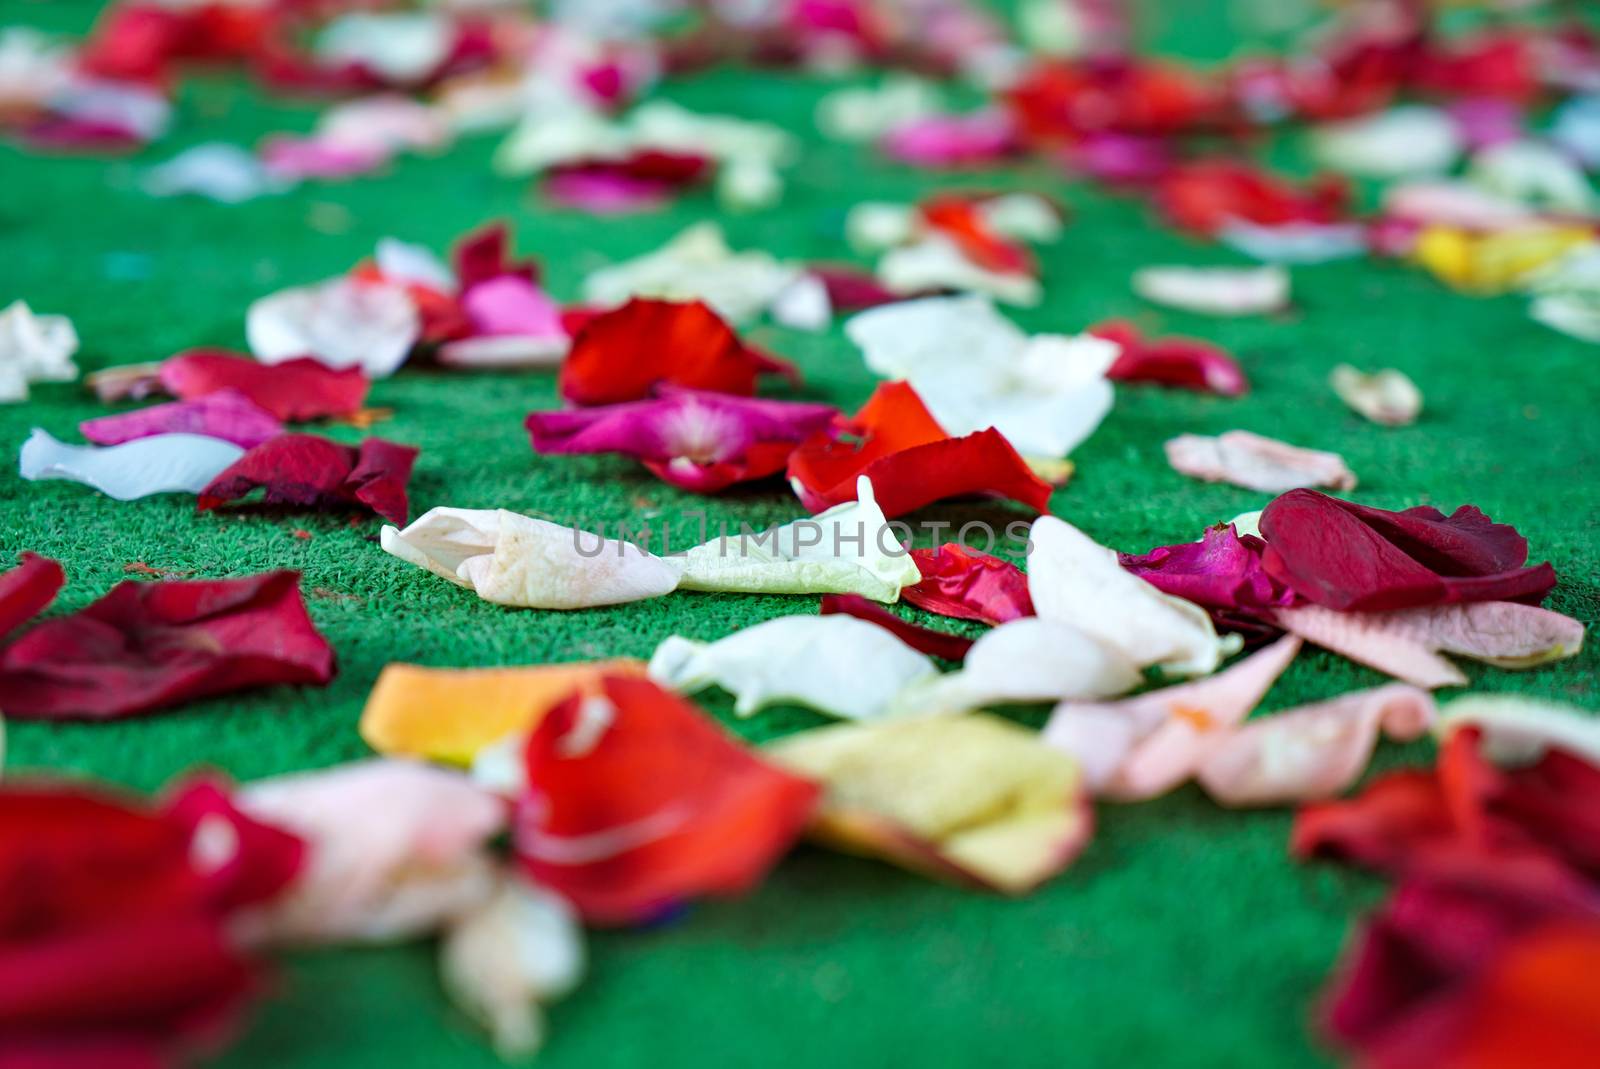 Red, white rose petals scattered on green carpet. Selective focus